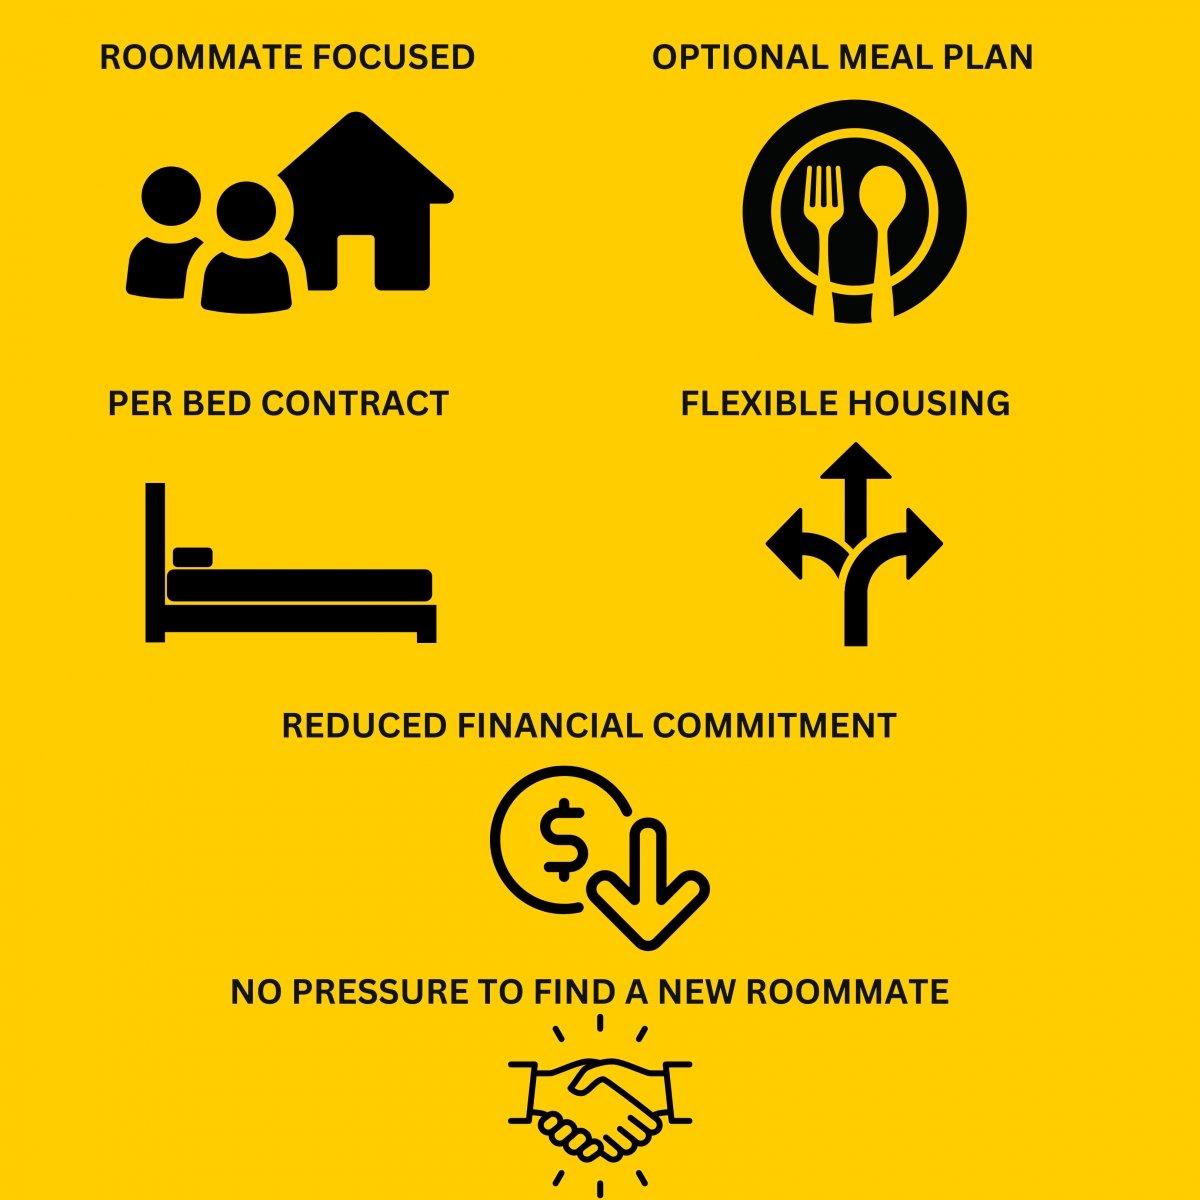 Roommate focused. Optional meal plan. Per-bed contract. No pressure to find a new roommate. Flexible housing. Reduced financial commitment.